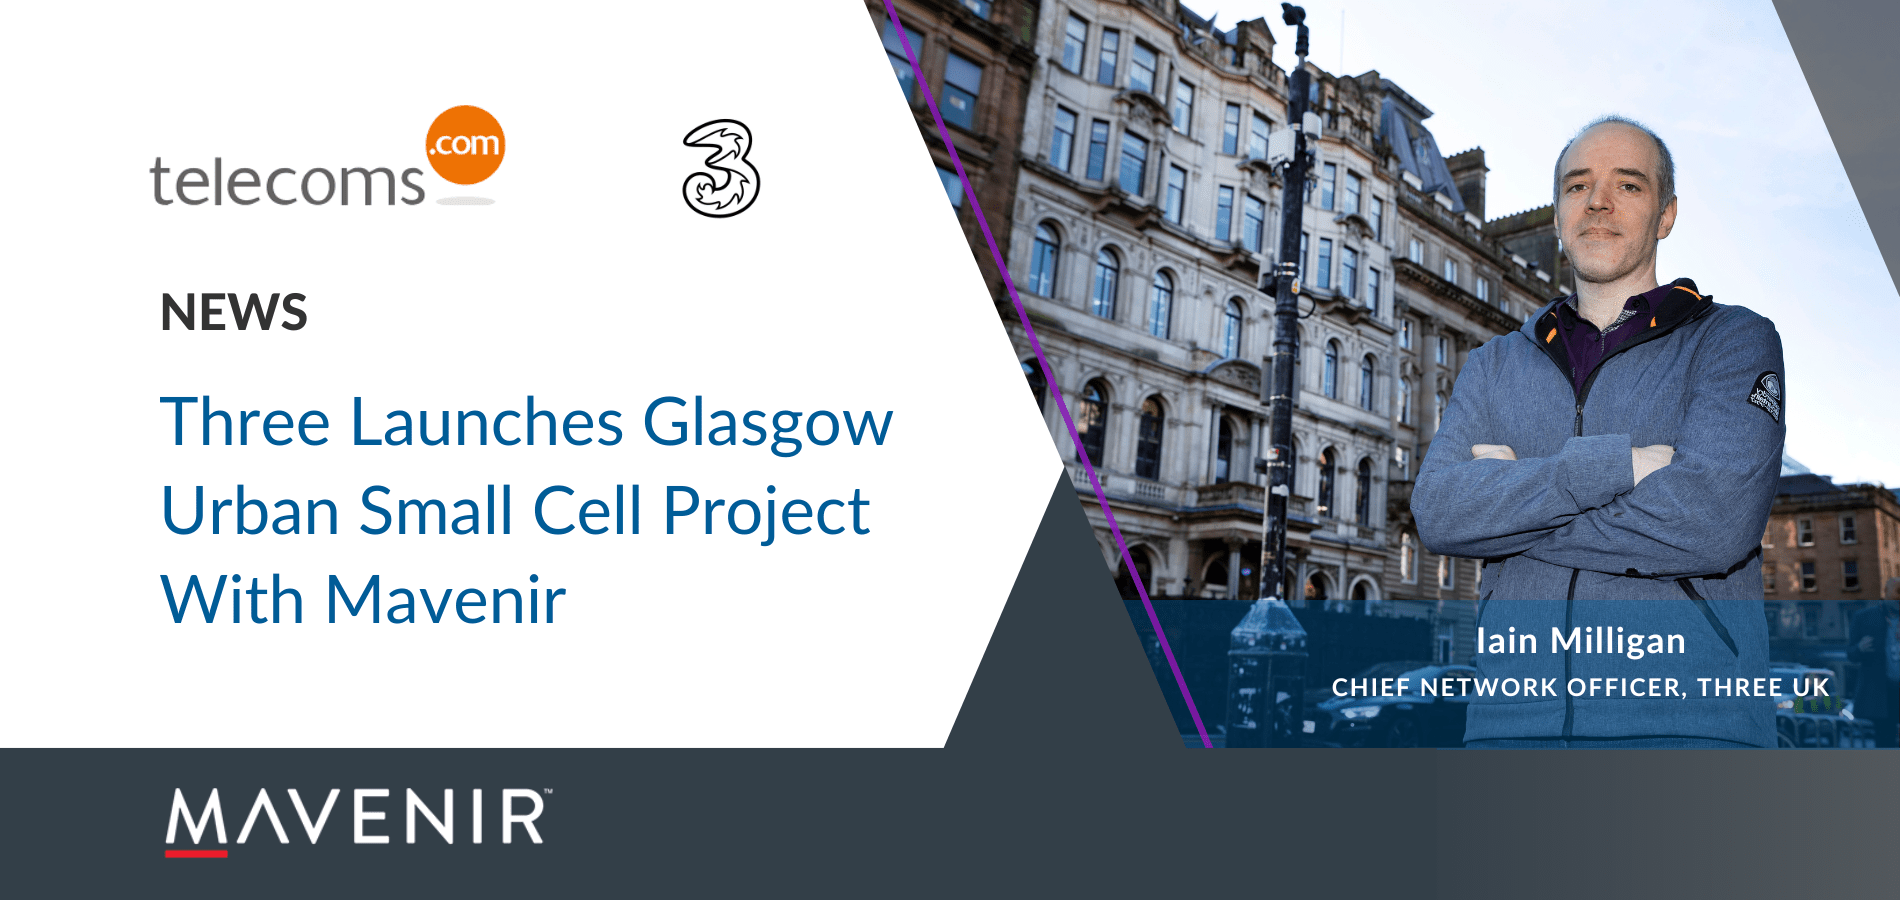 Three Launches Glasgow Urban Small Cell Project With Mavenir